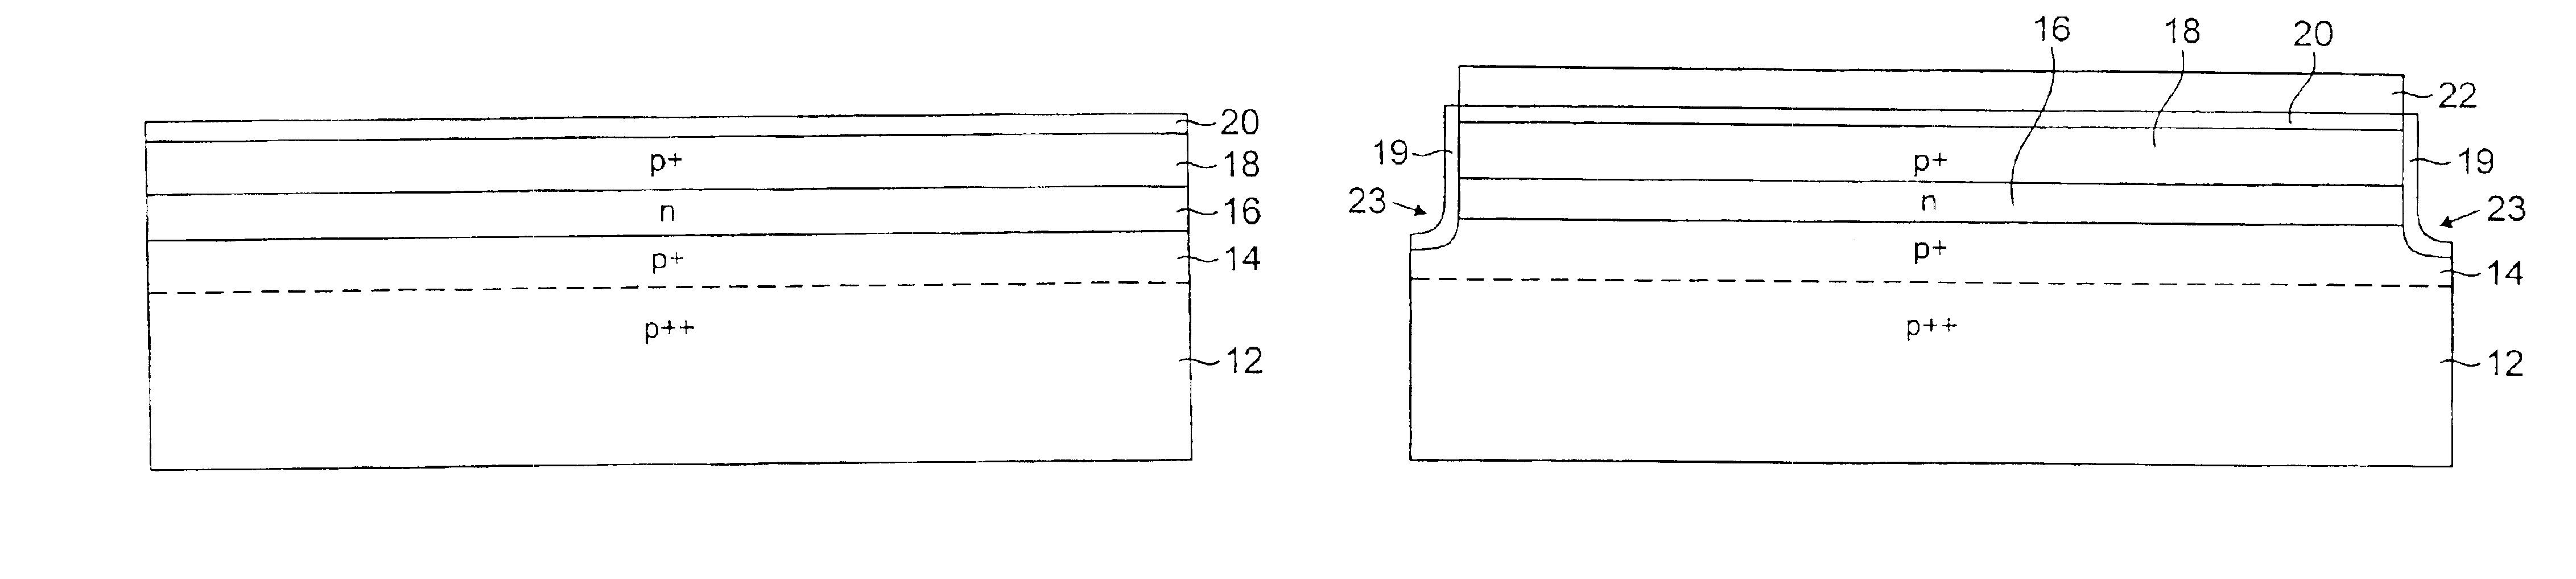 Low-voltage punch-through bi-directional transient-voltage suppression devices having surface breakdown protection and methods of making the same